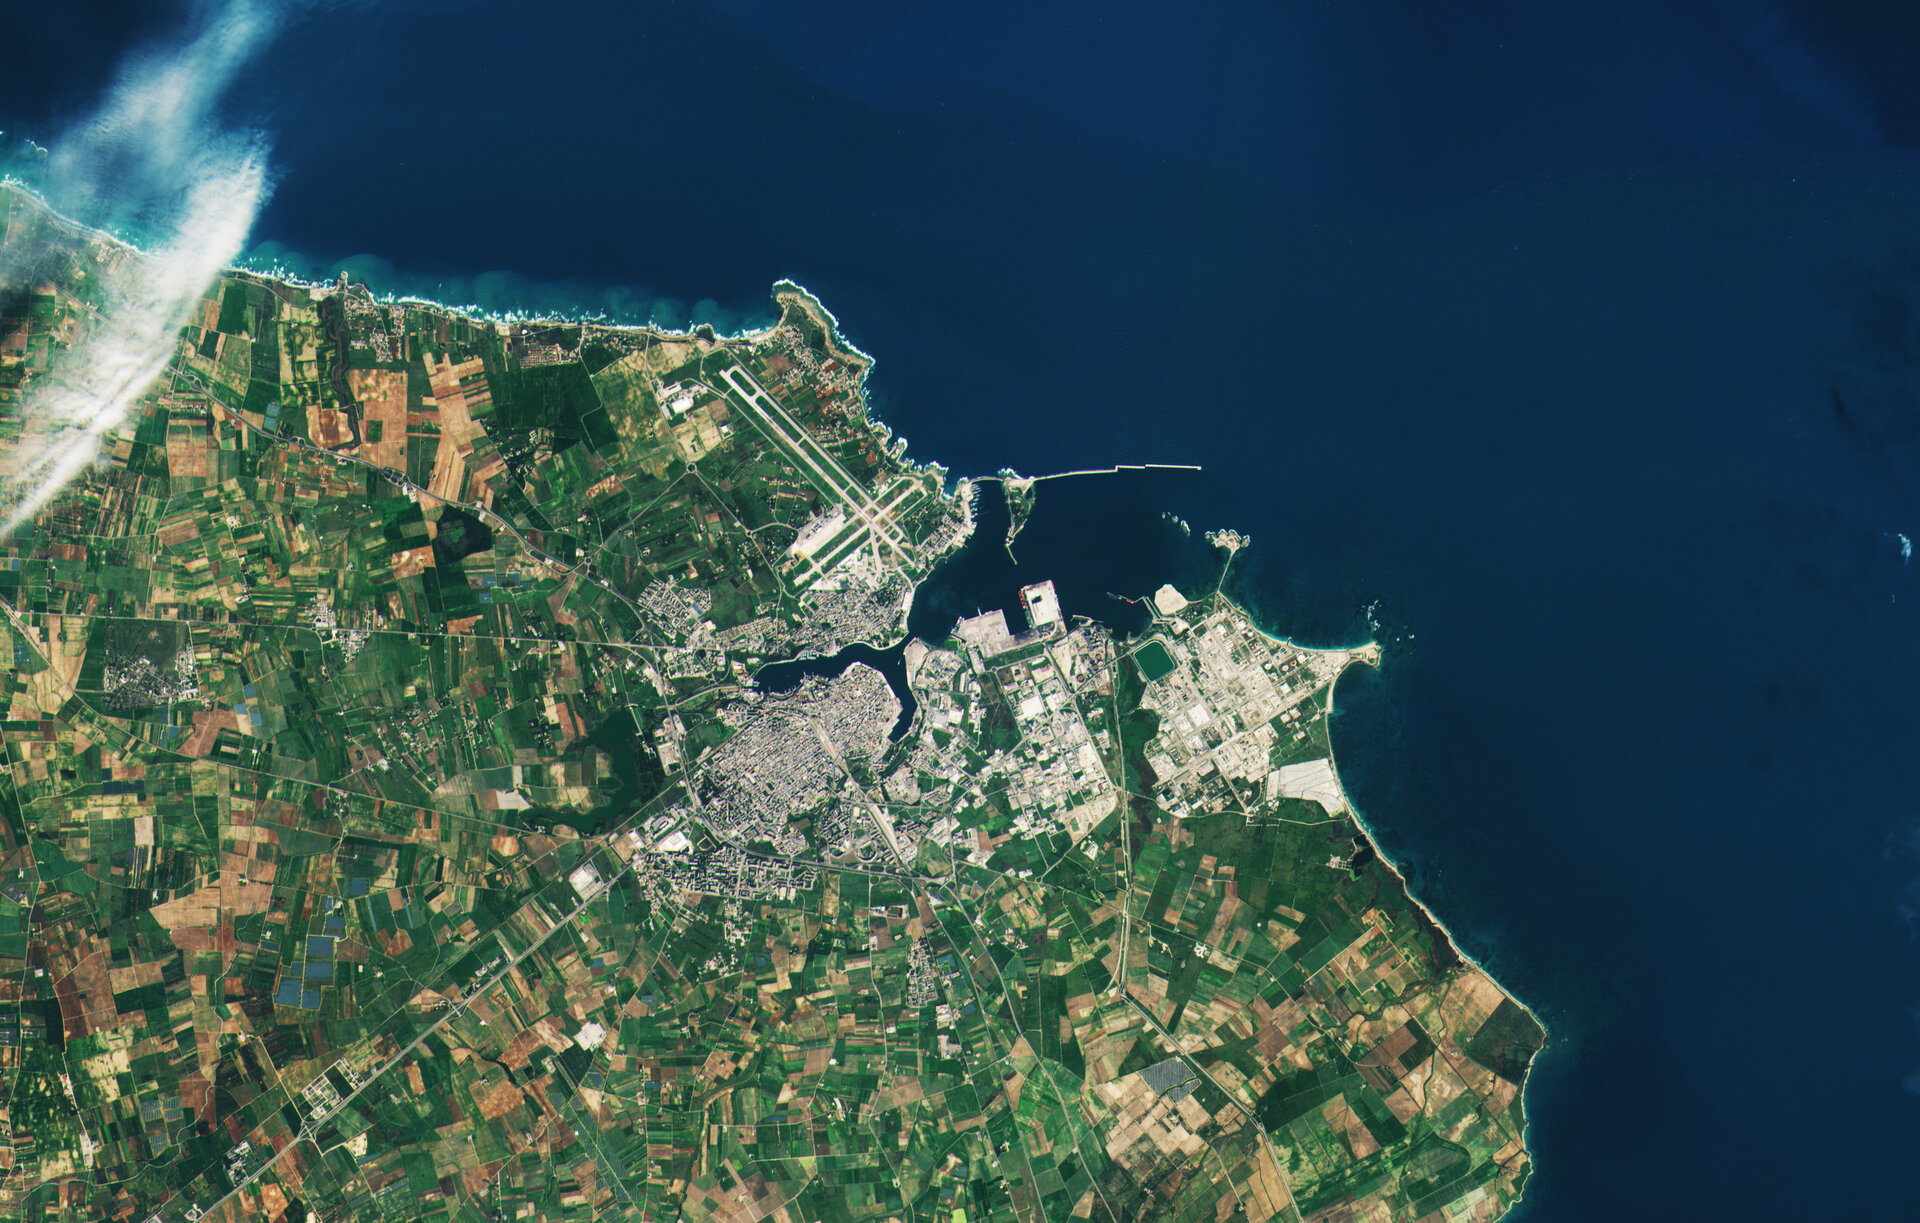 This stunning picture shows an Italian city called Brindisi